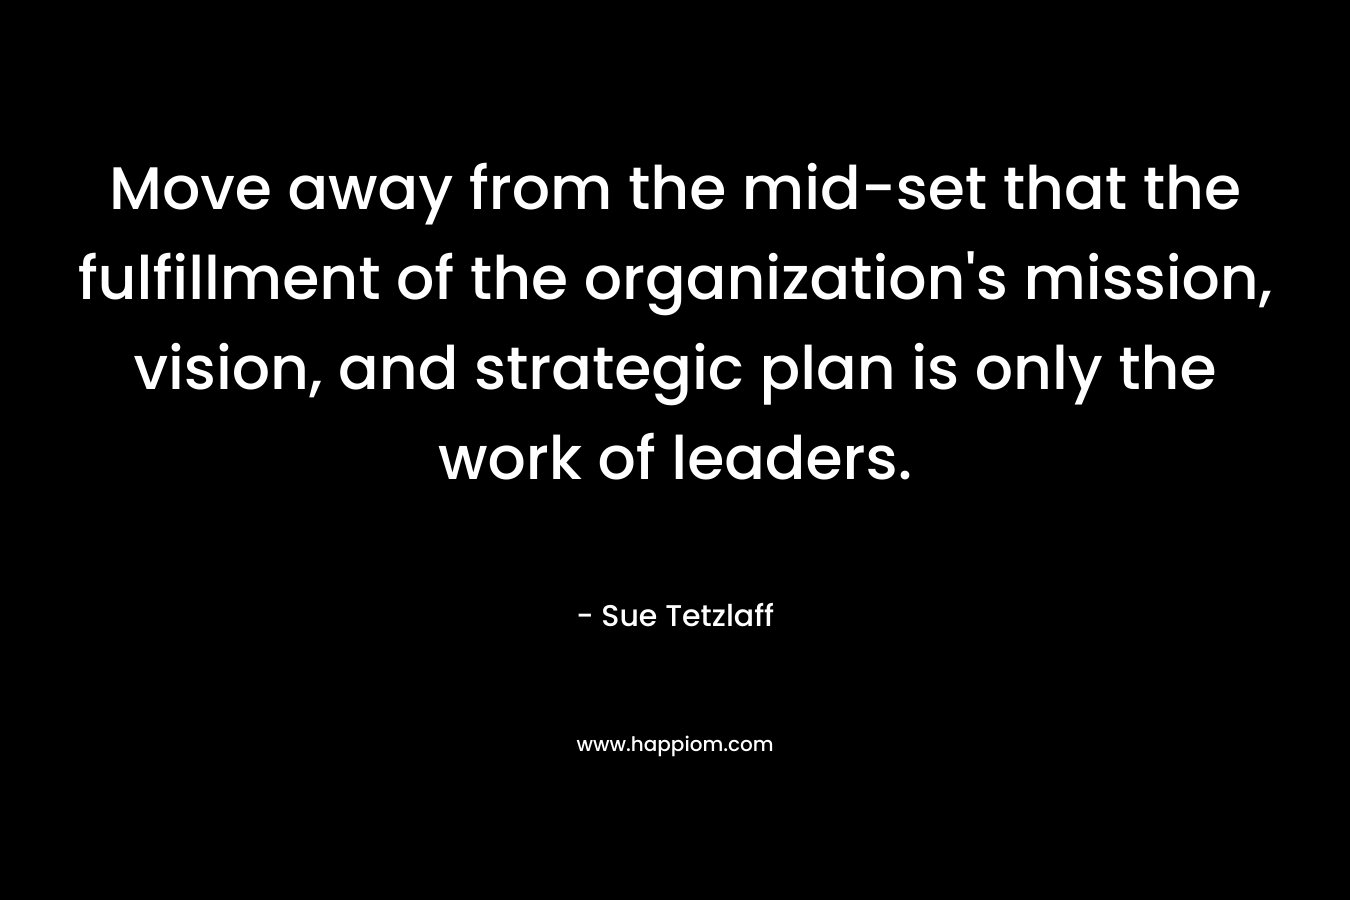 Move away from the mid-set that the fulfillment of the organization's mission, vision, and strategic plan is only the work of leaders.